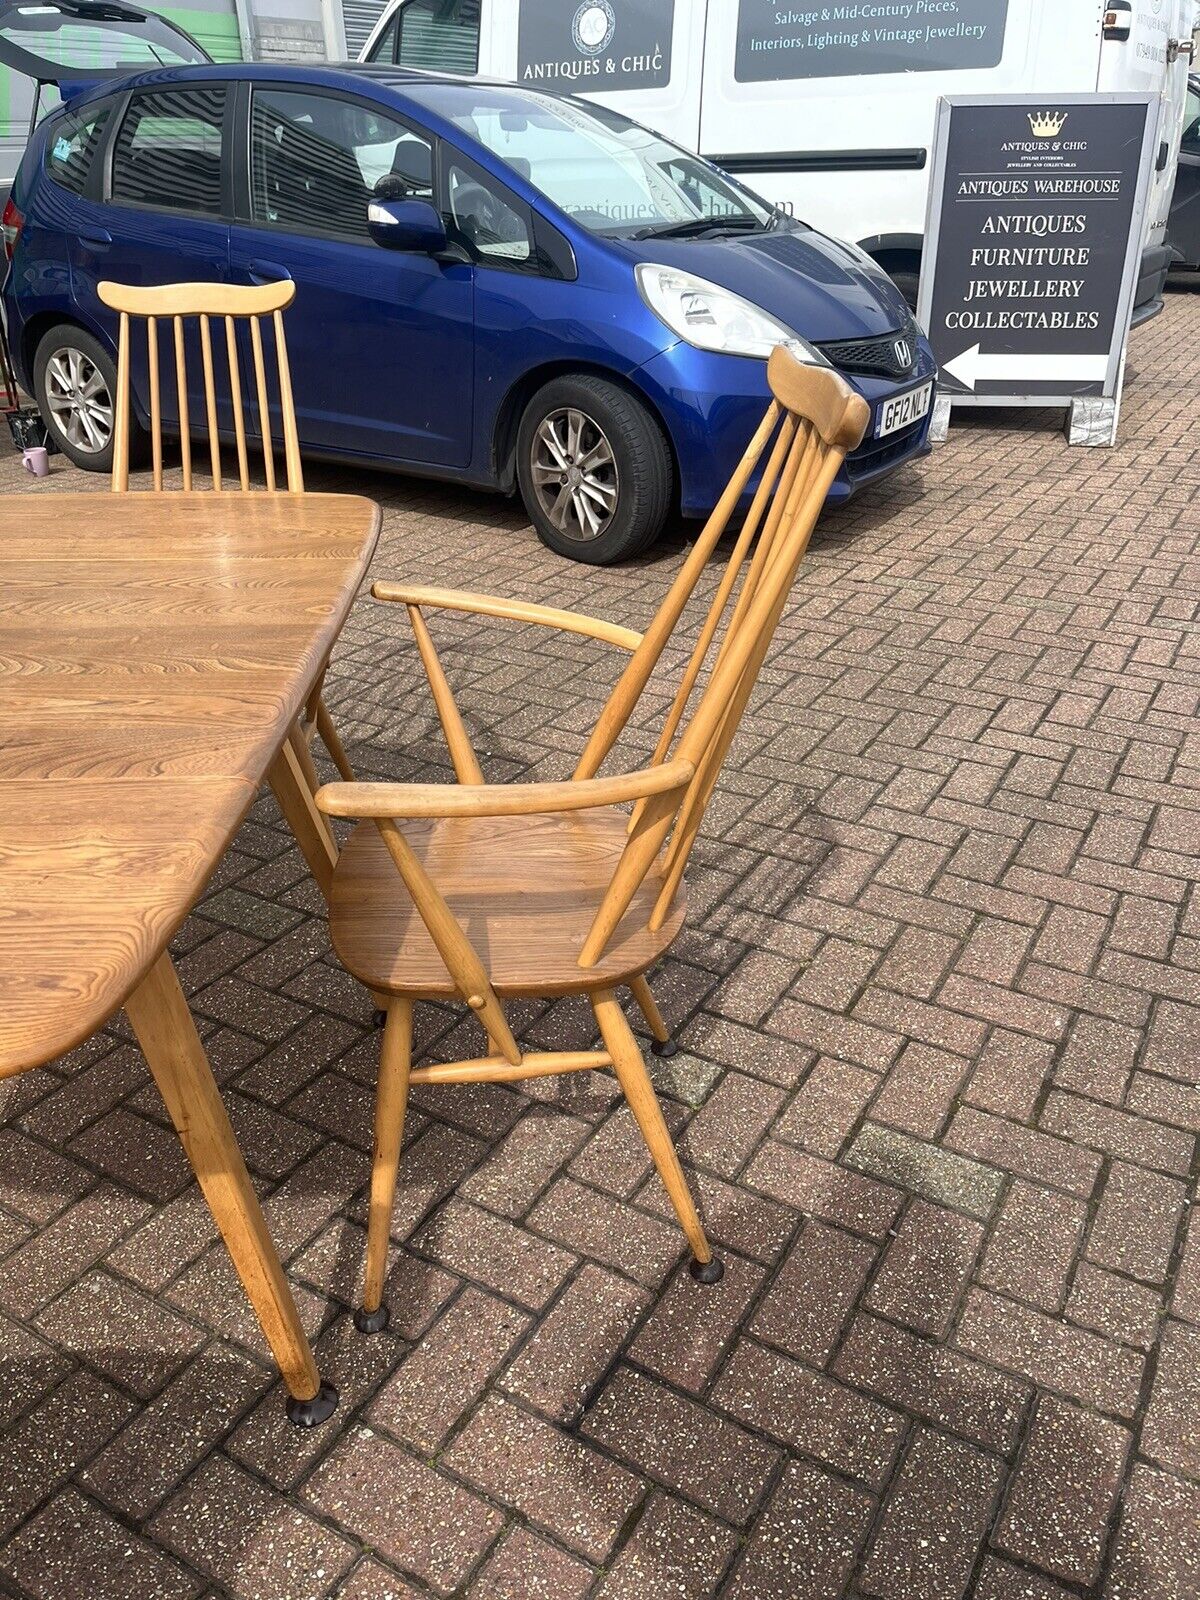 Vintage Extending Ercol Table And Chairs